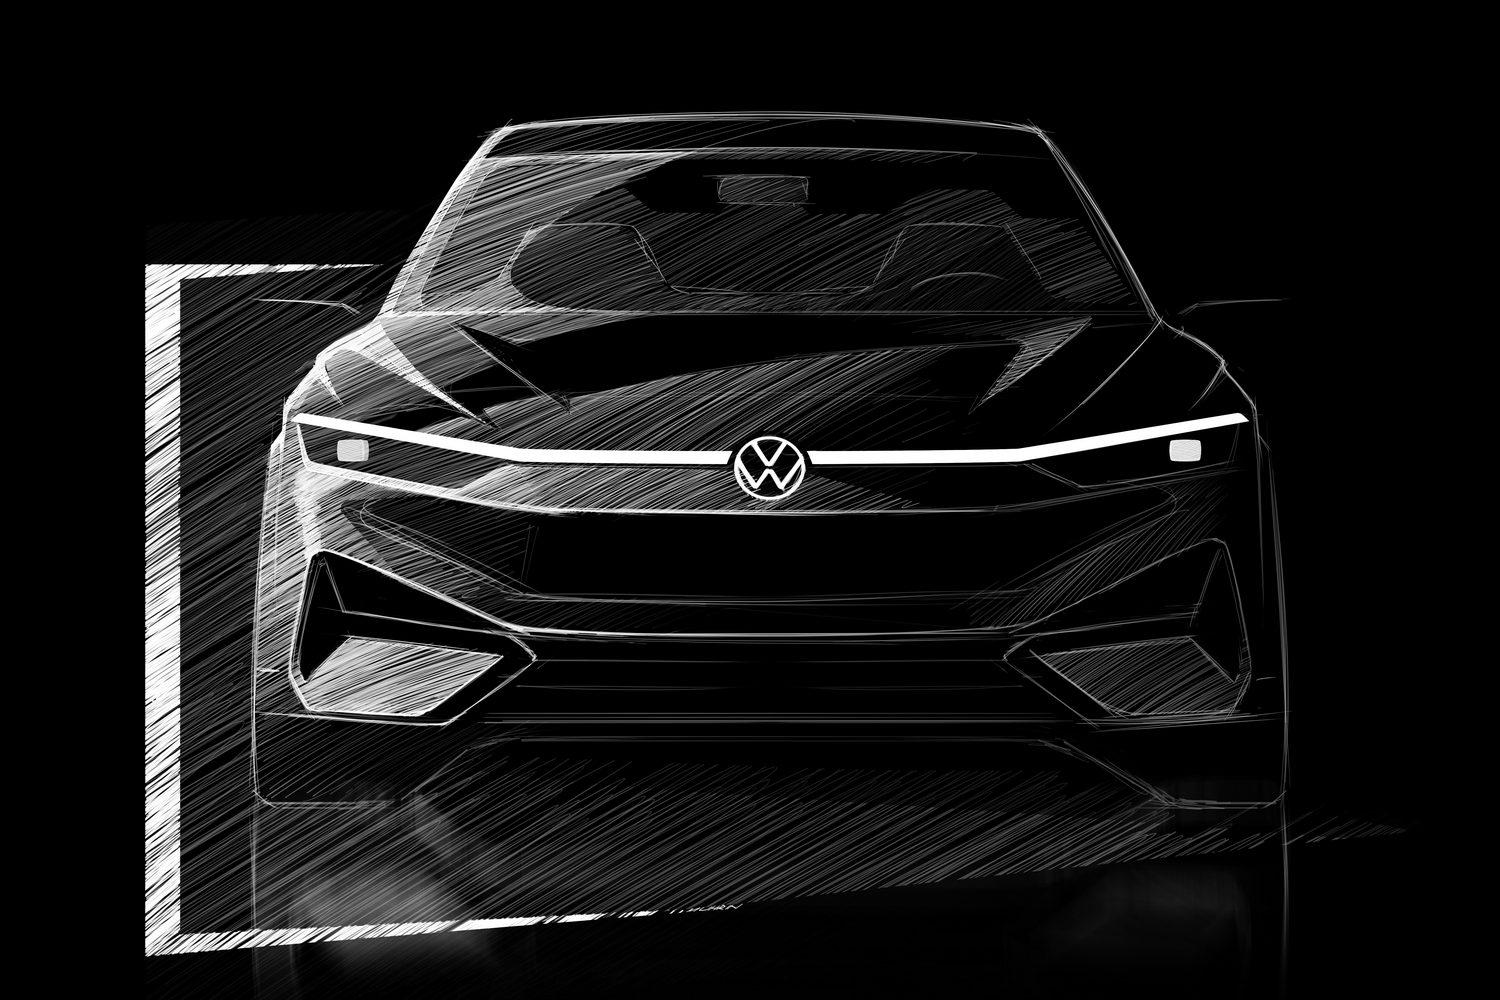 Volkswagen ID.7 gets 700km range - car and motoring news by CompleteCar.ie